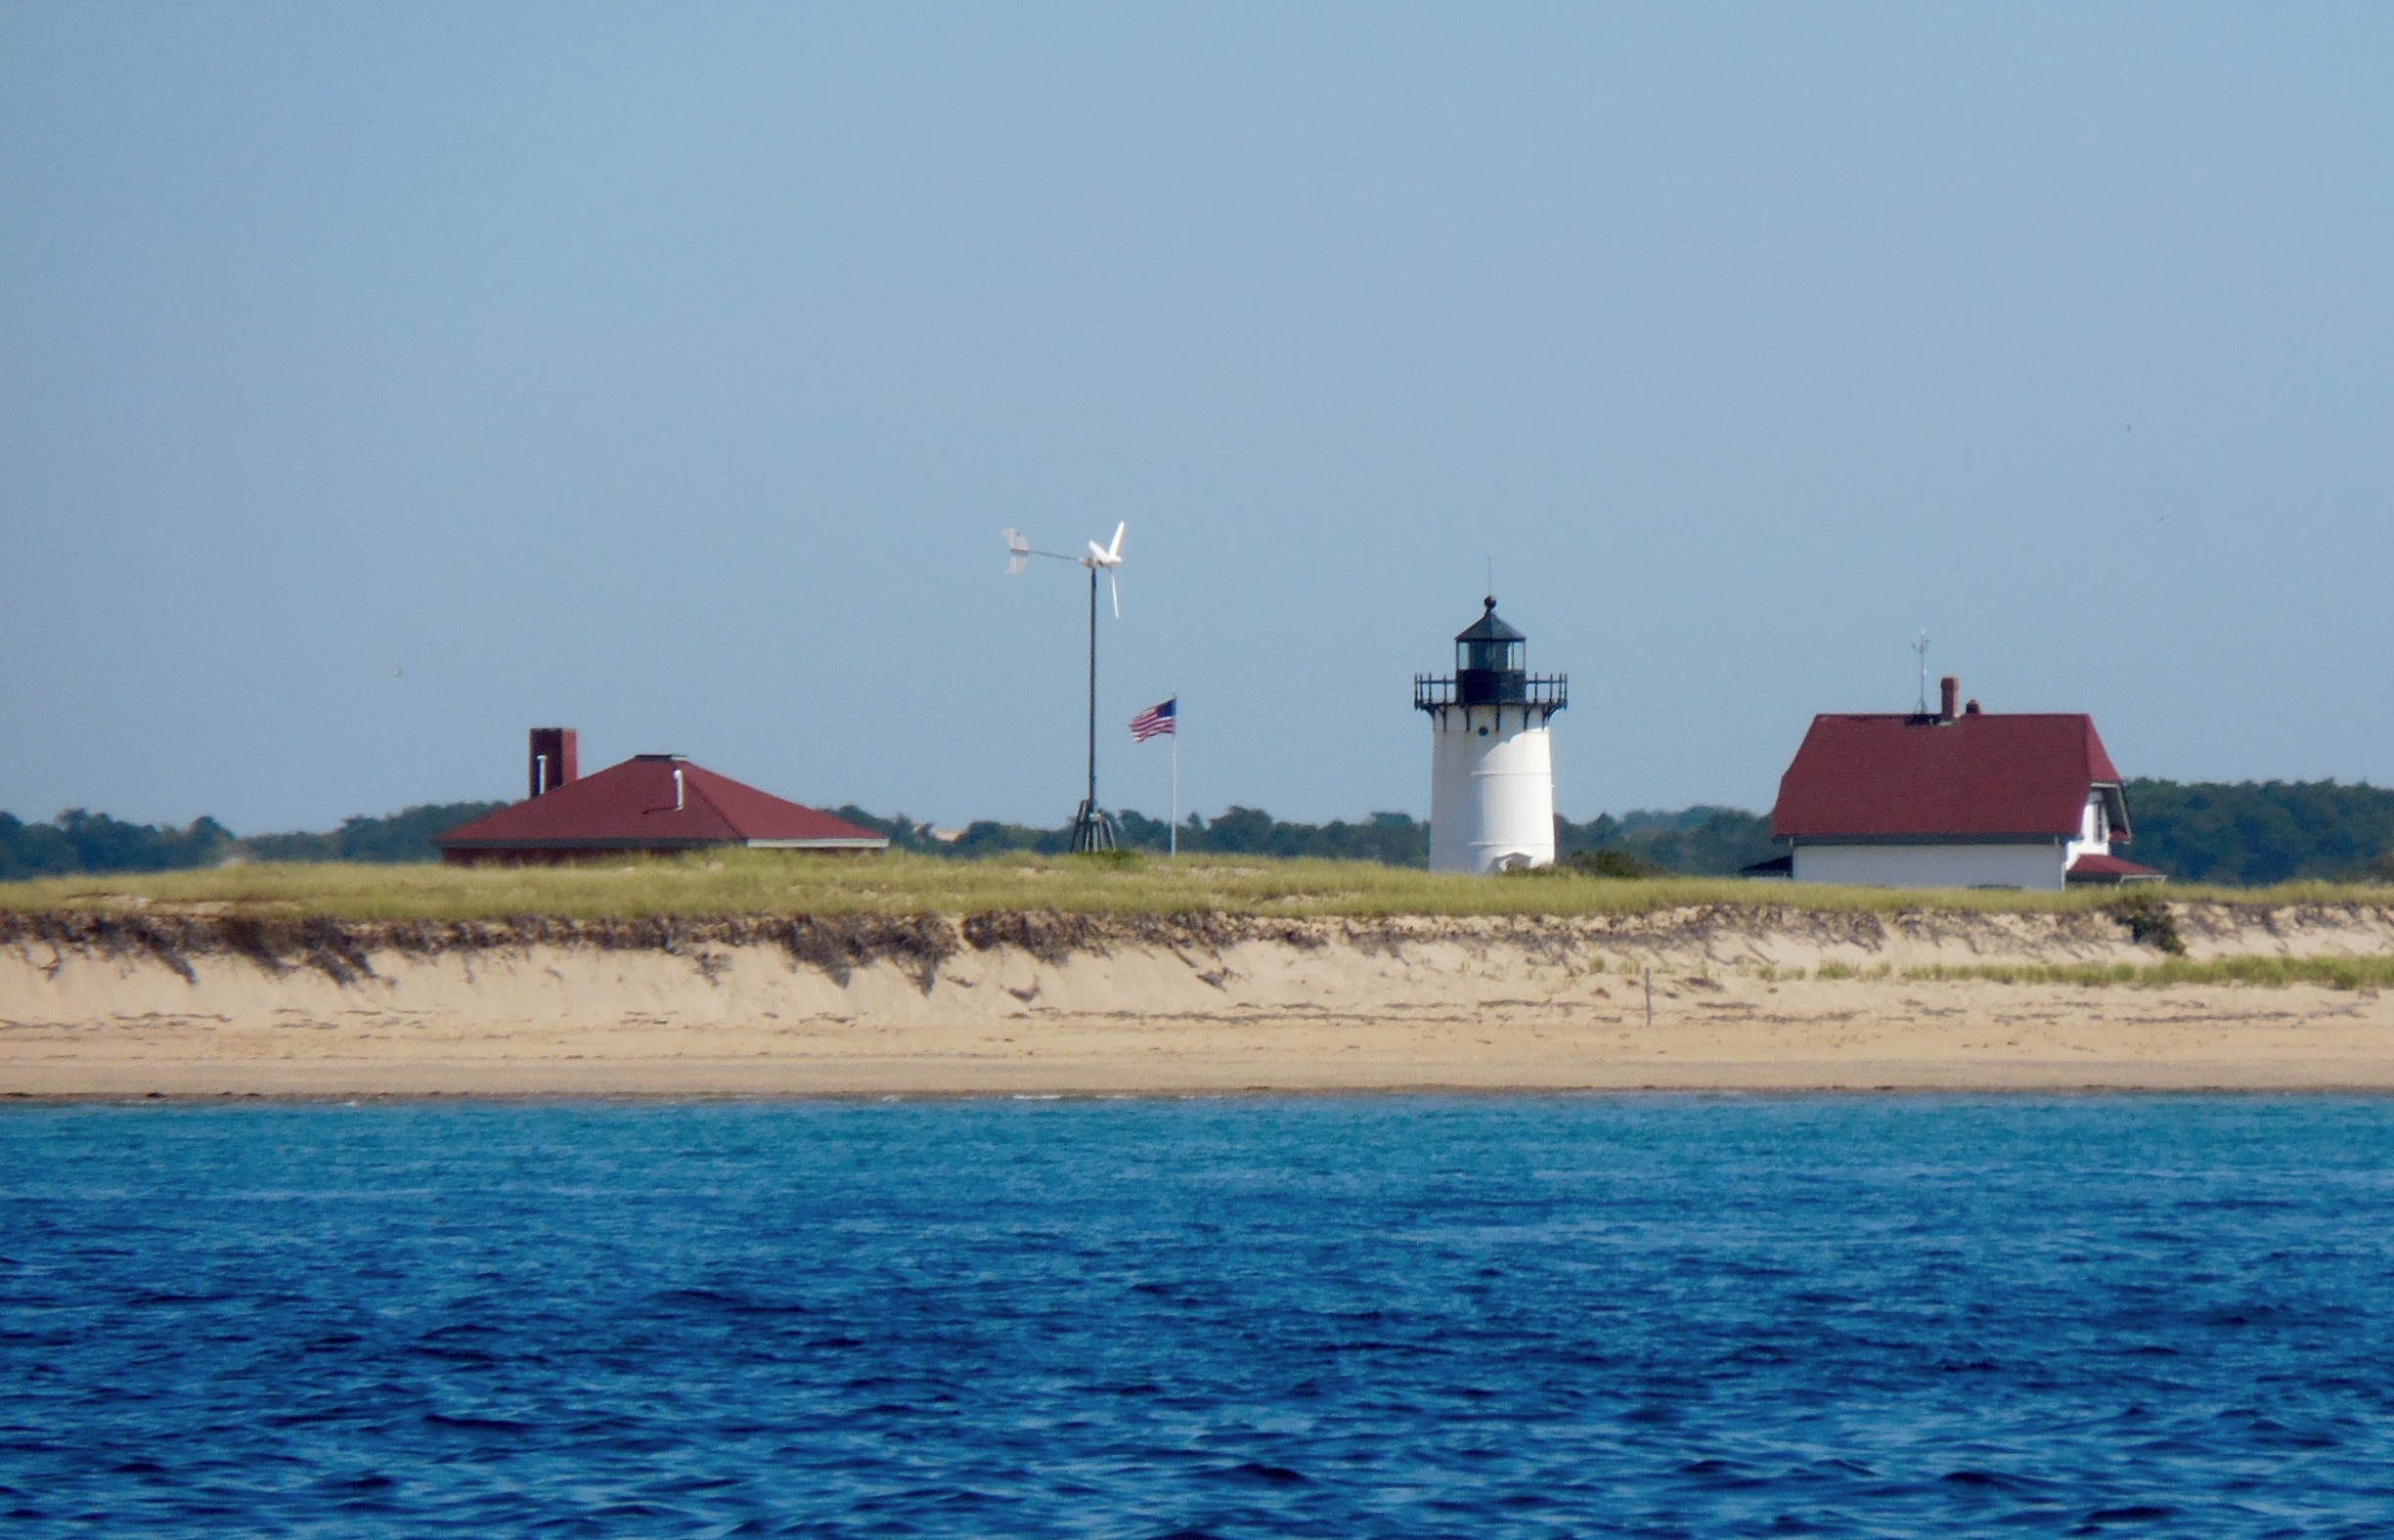 This is one lighthouse that will let you spend an overnight in the keeper's house!
A light first began operating at Race Point in 1816 but the current tower was built in 1876.  Today the light and fog horn are run by solar power.